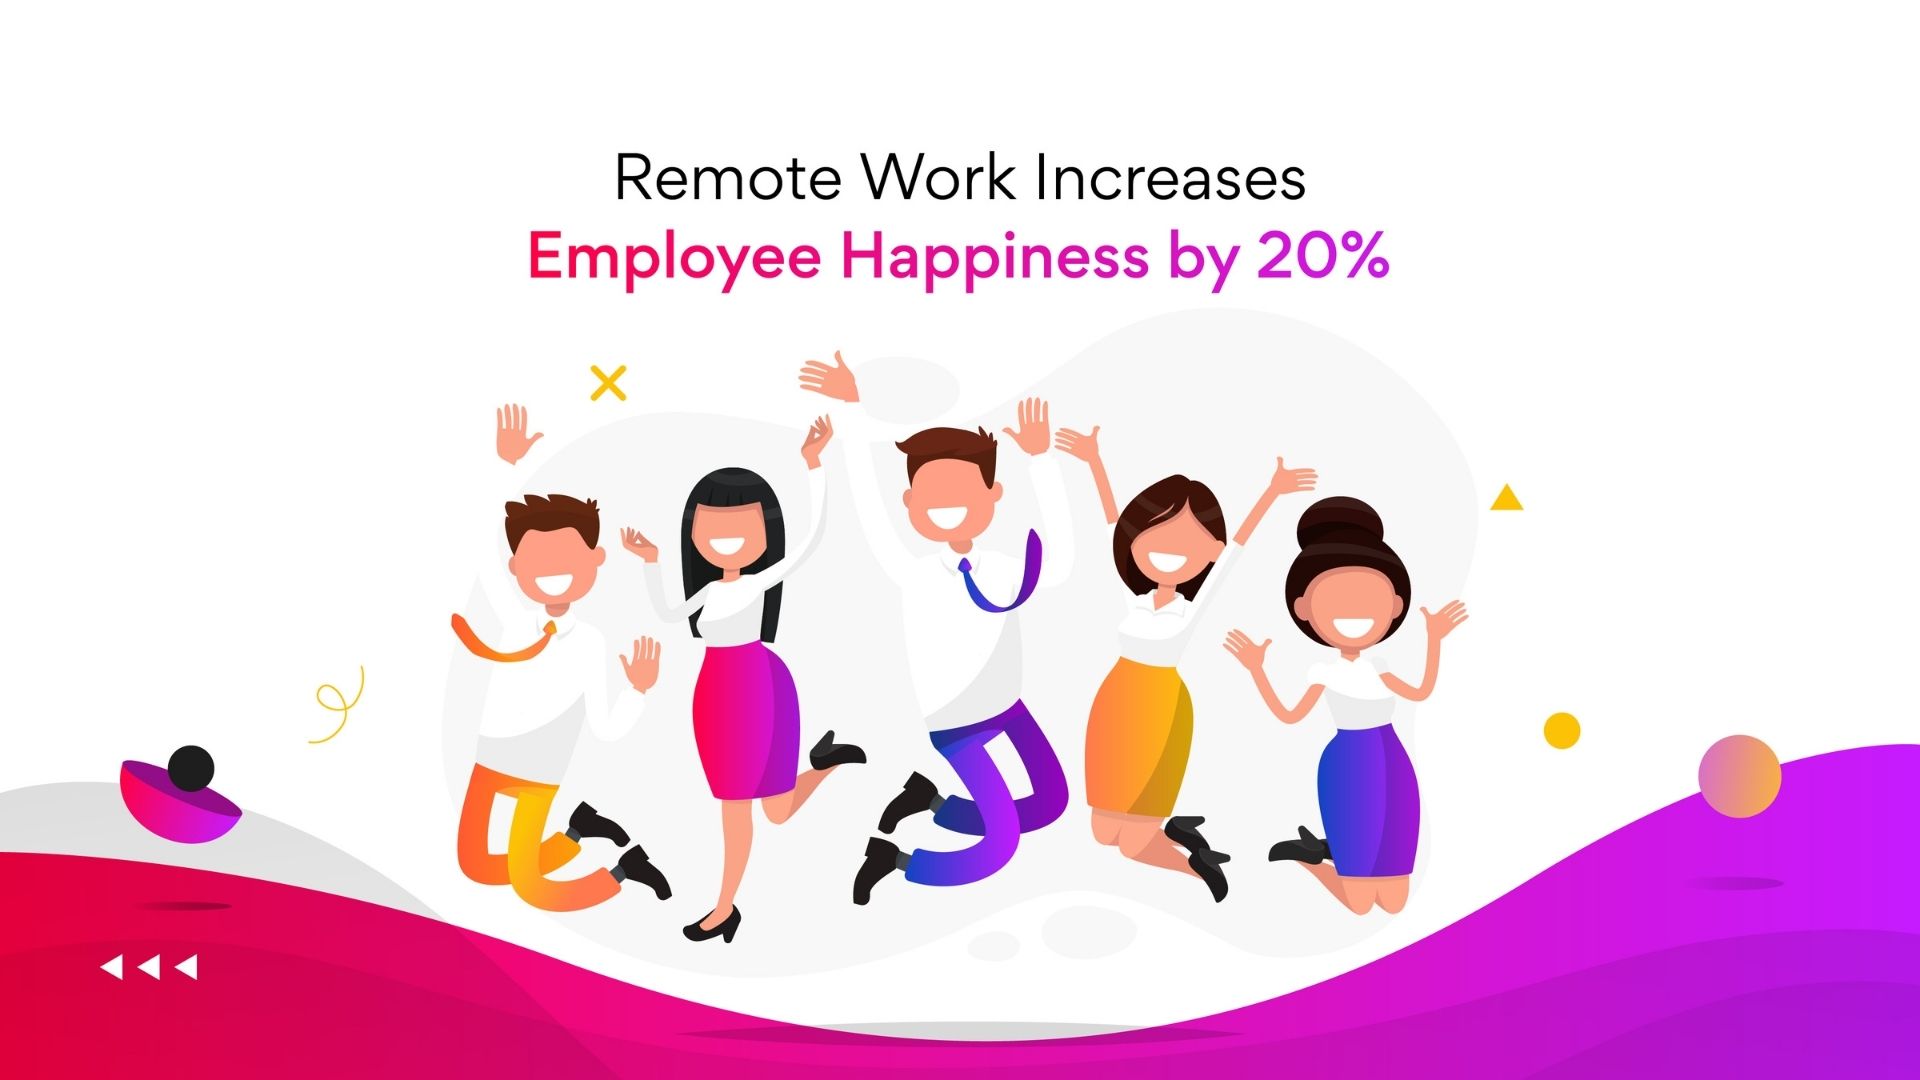 Remote work increases employee happiness